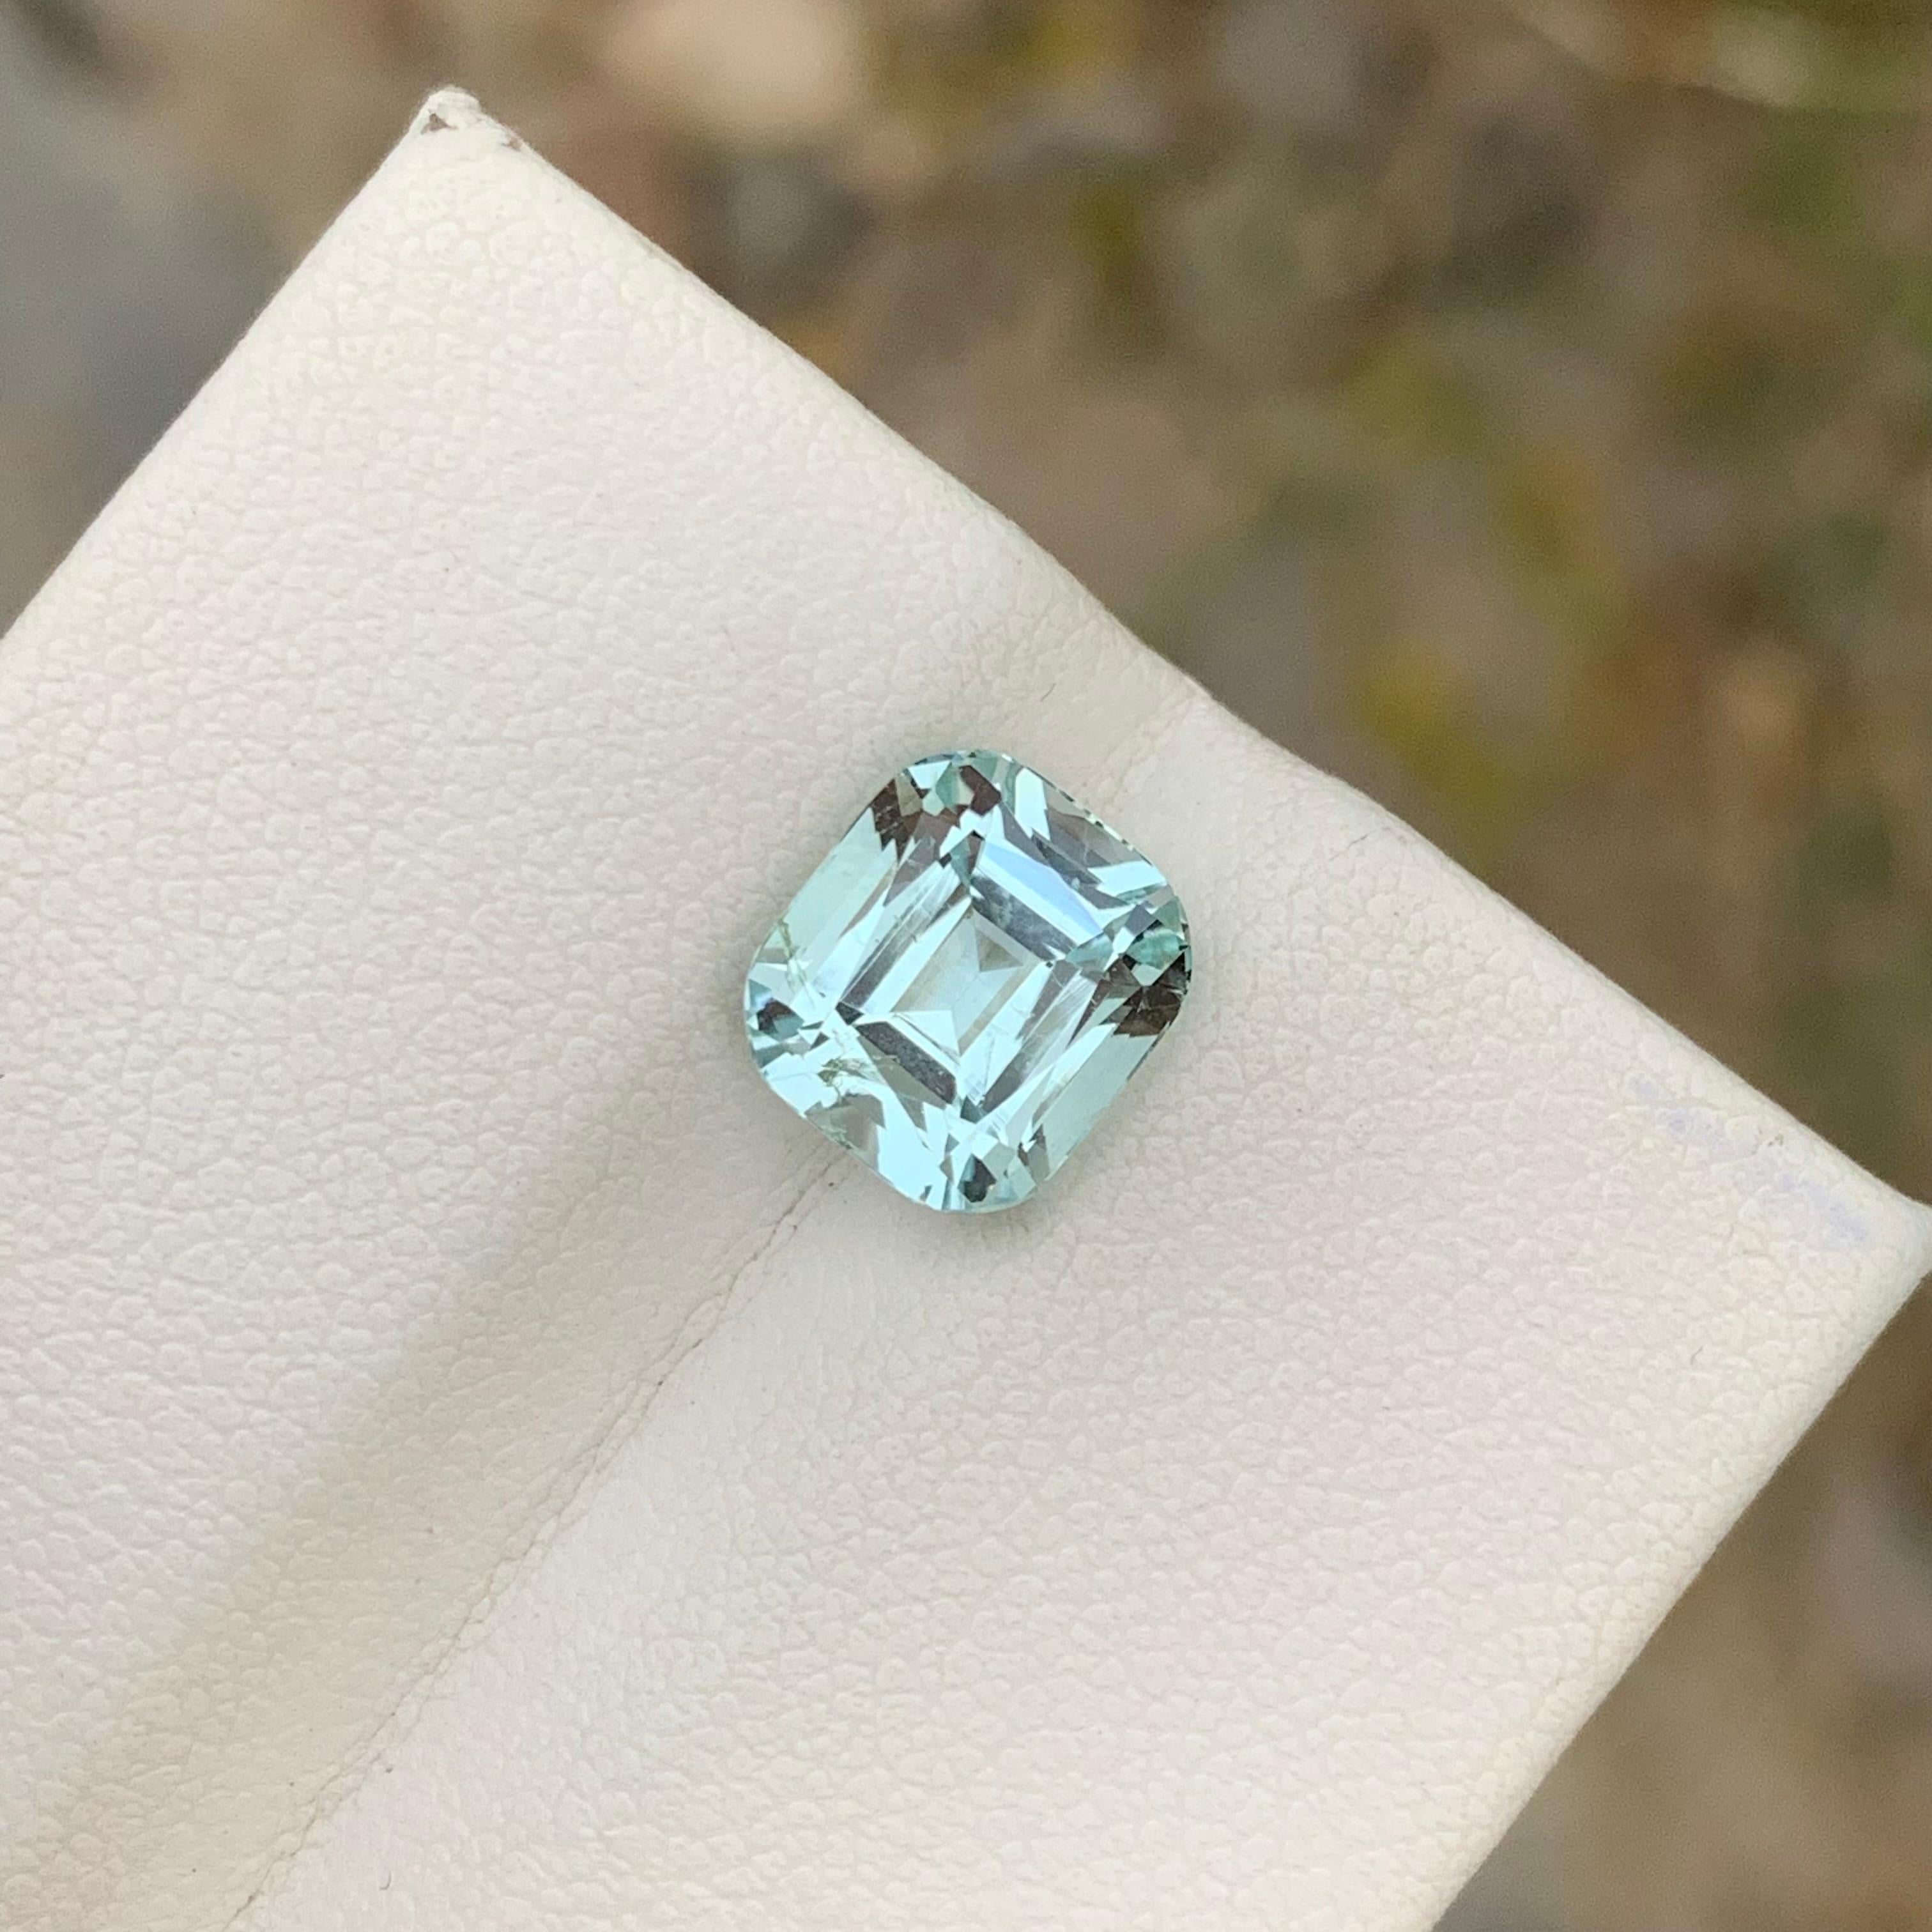 Cushion Cut 3.55 Carats Natural Loose Aquamarine Ring Gem From Shigar Valley Mine For Sale